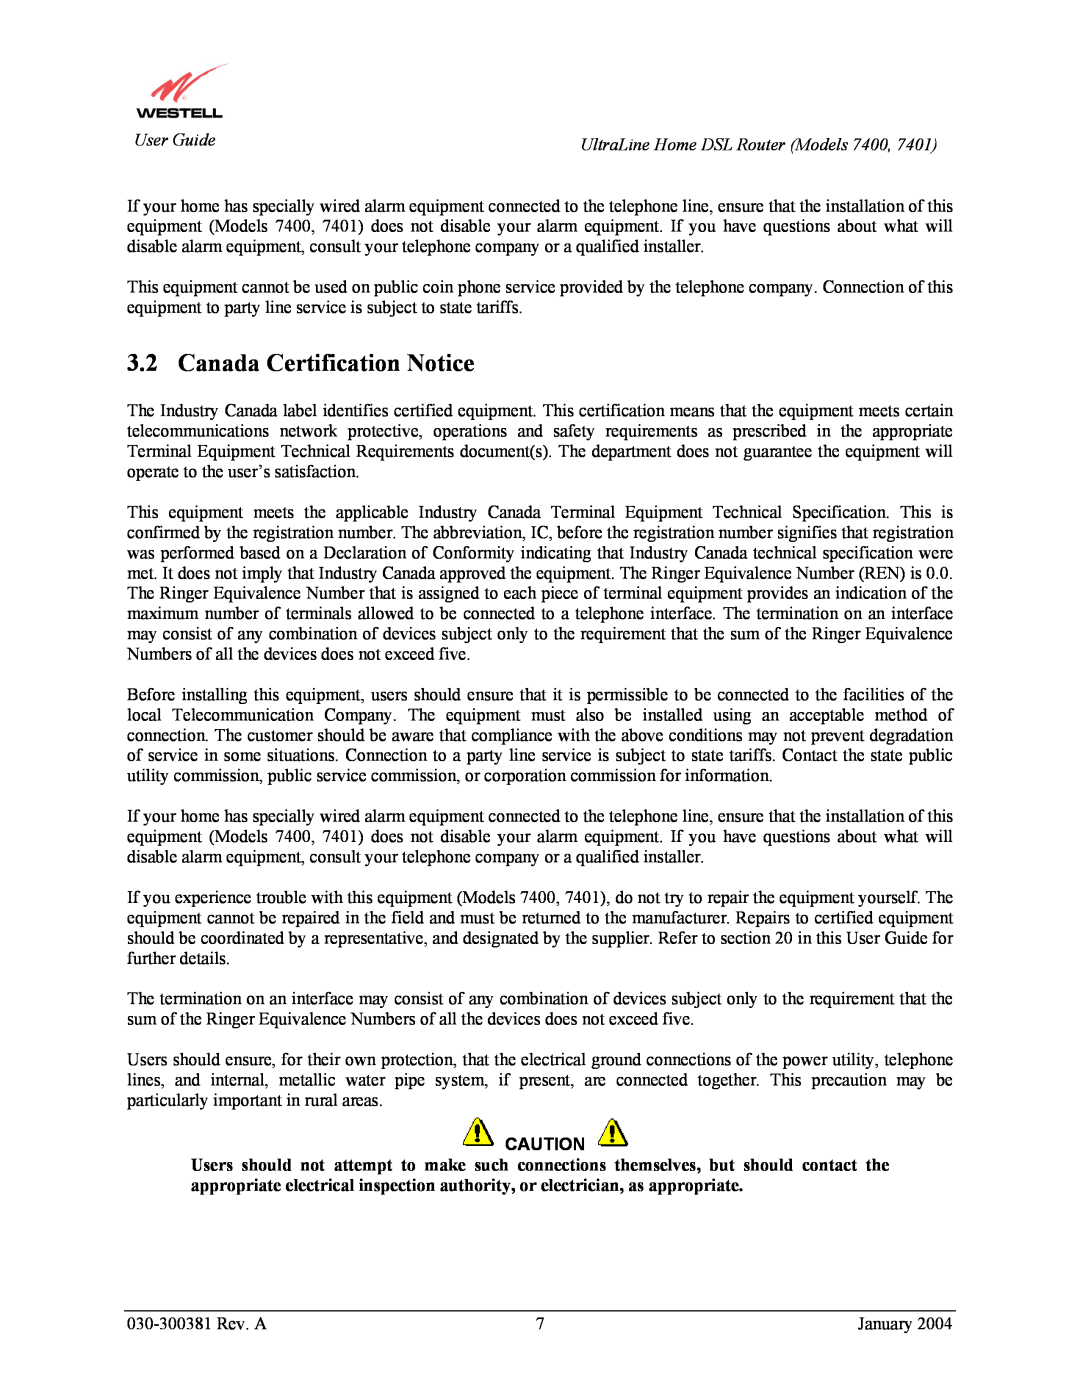 Westell Technologies 7400, 7401 manual Canada Certification Notice 